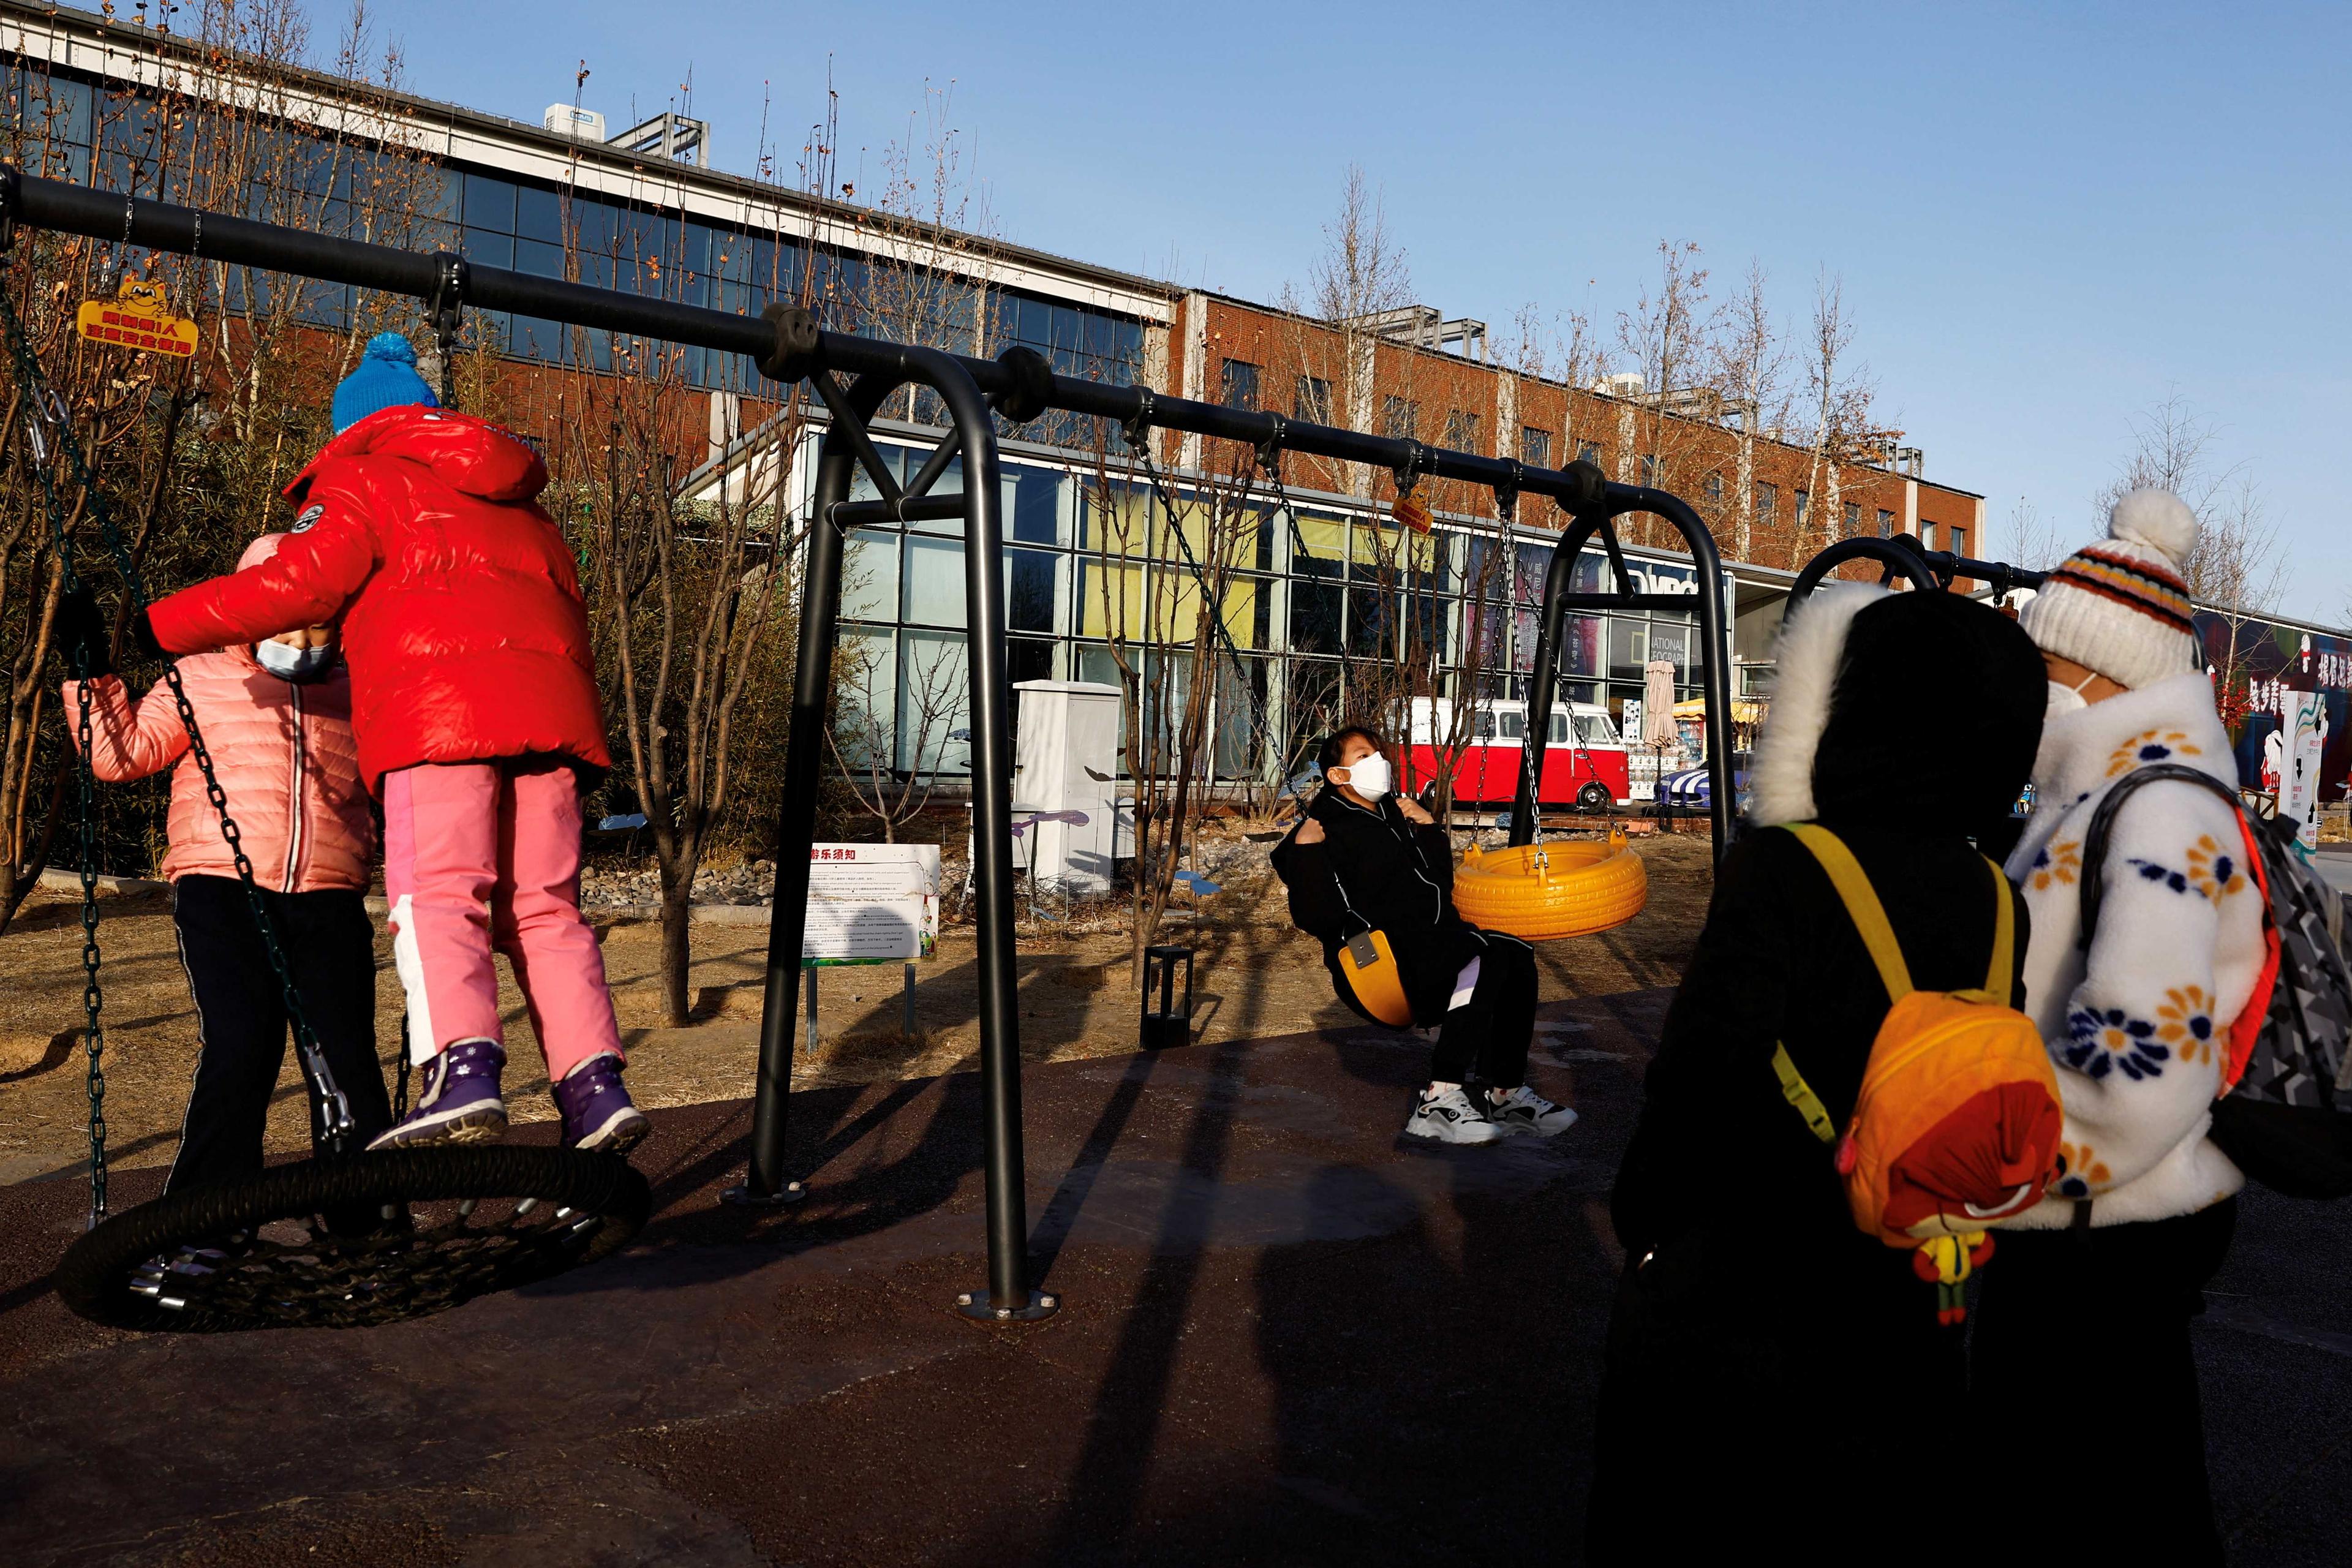 Children play on swings at an outdoor playground in Beijing, China Jan 14. Photo: Reuters